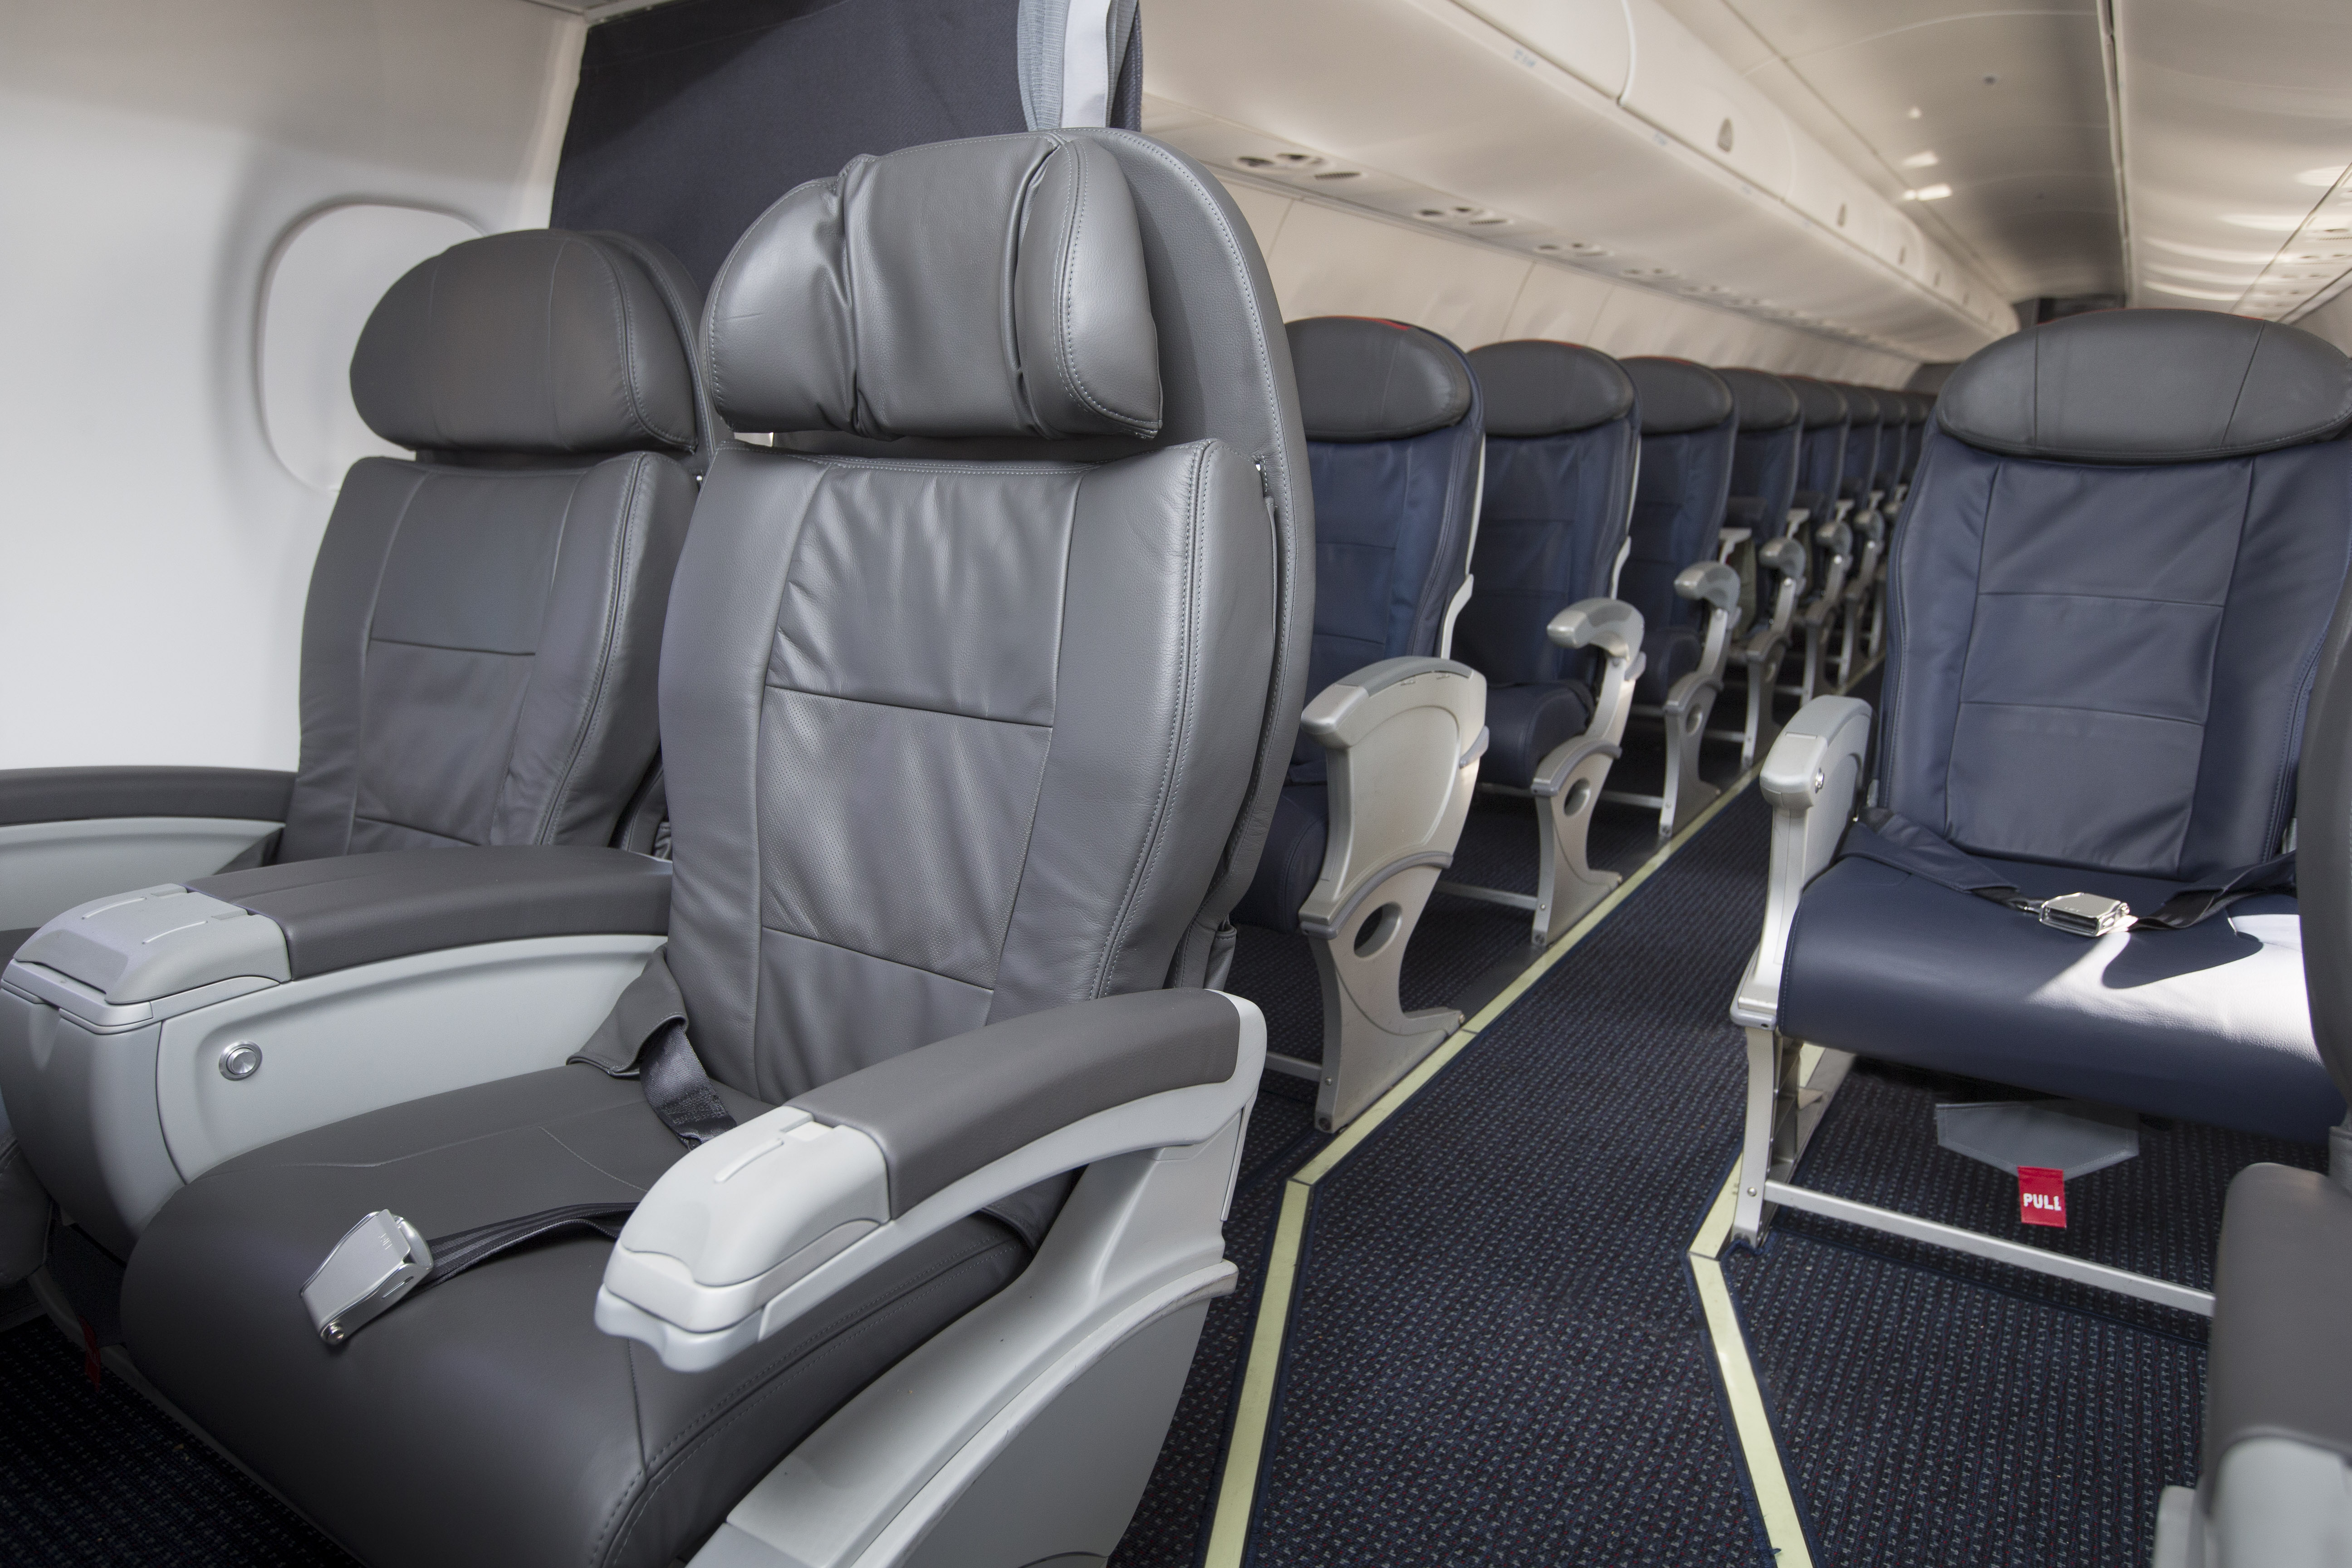 Embraer 175 Delta First Class